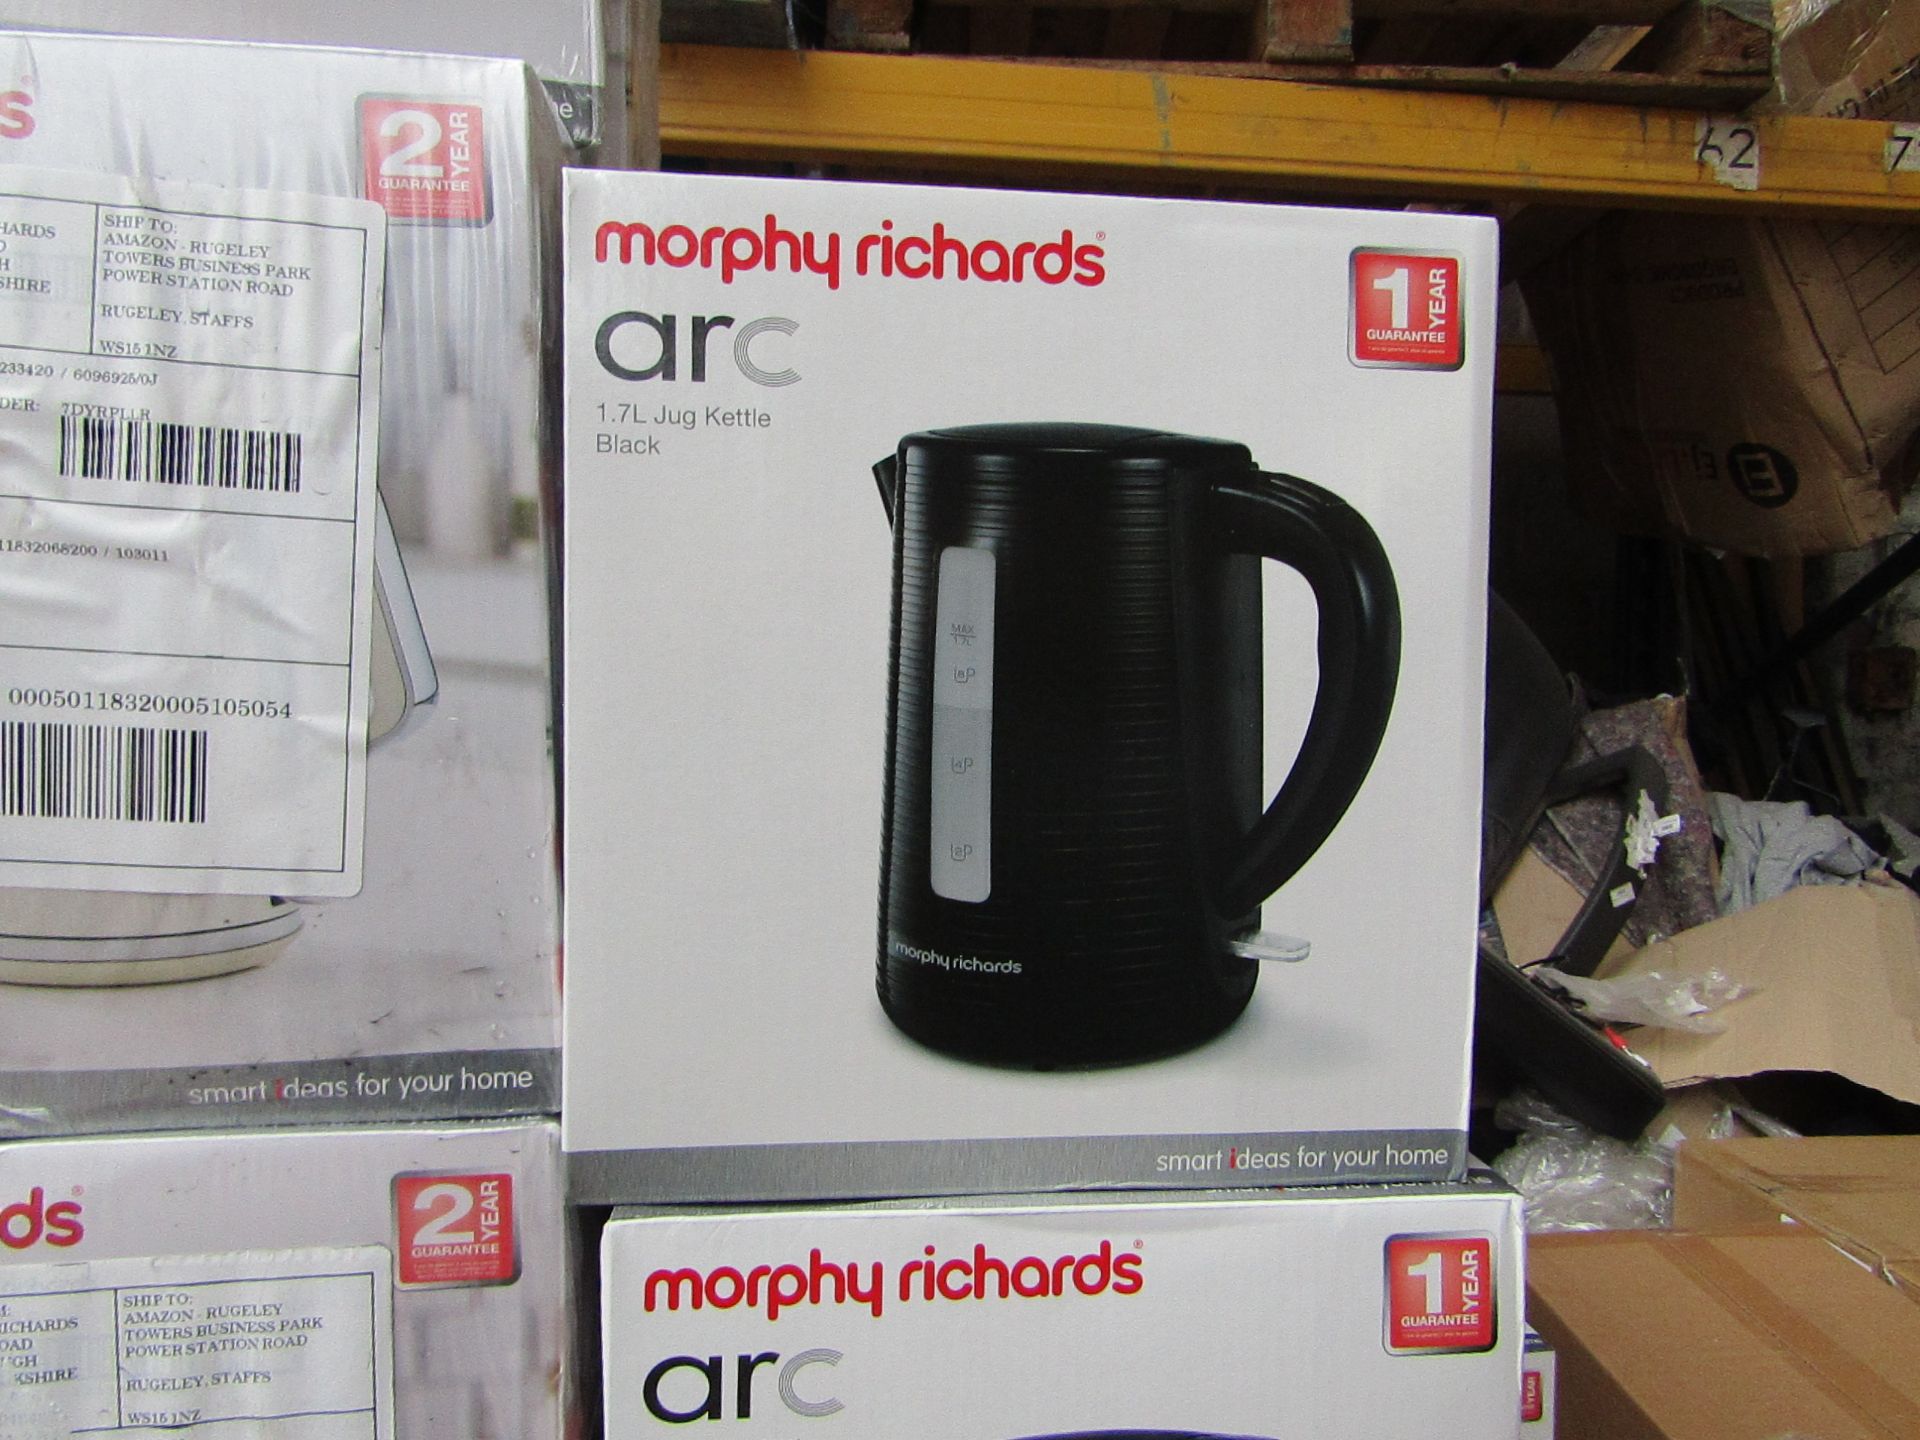 Morphy Richards Arc 1.7L jug black kettle, brand new and boxed. RRP £26.99